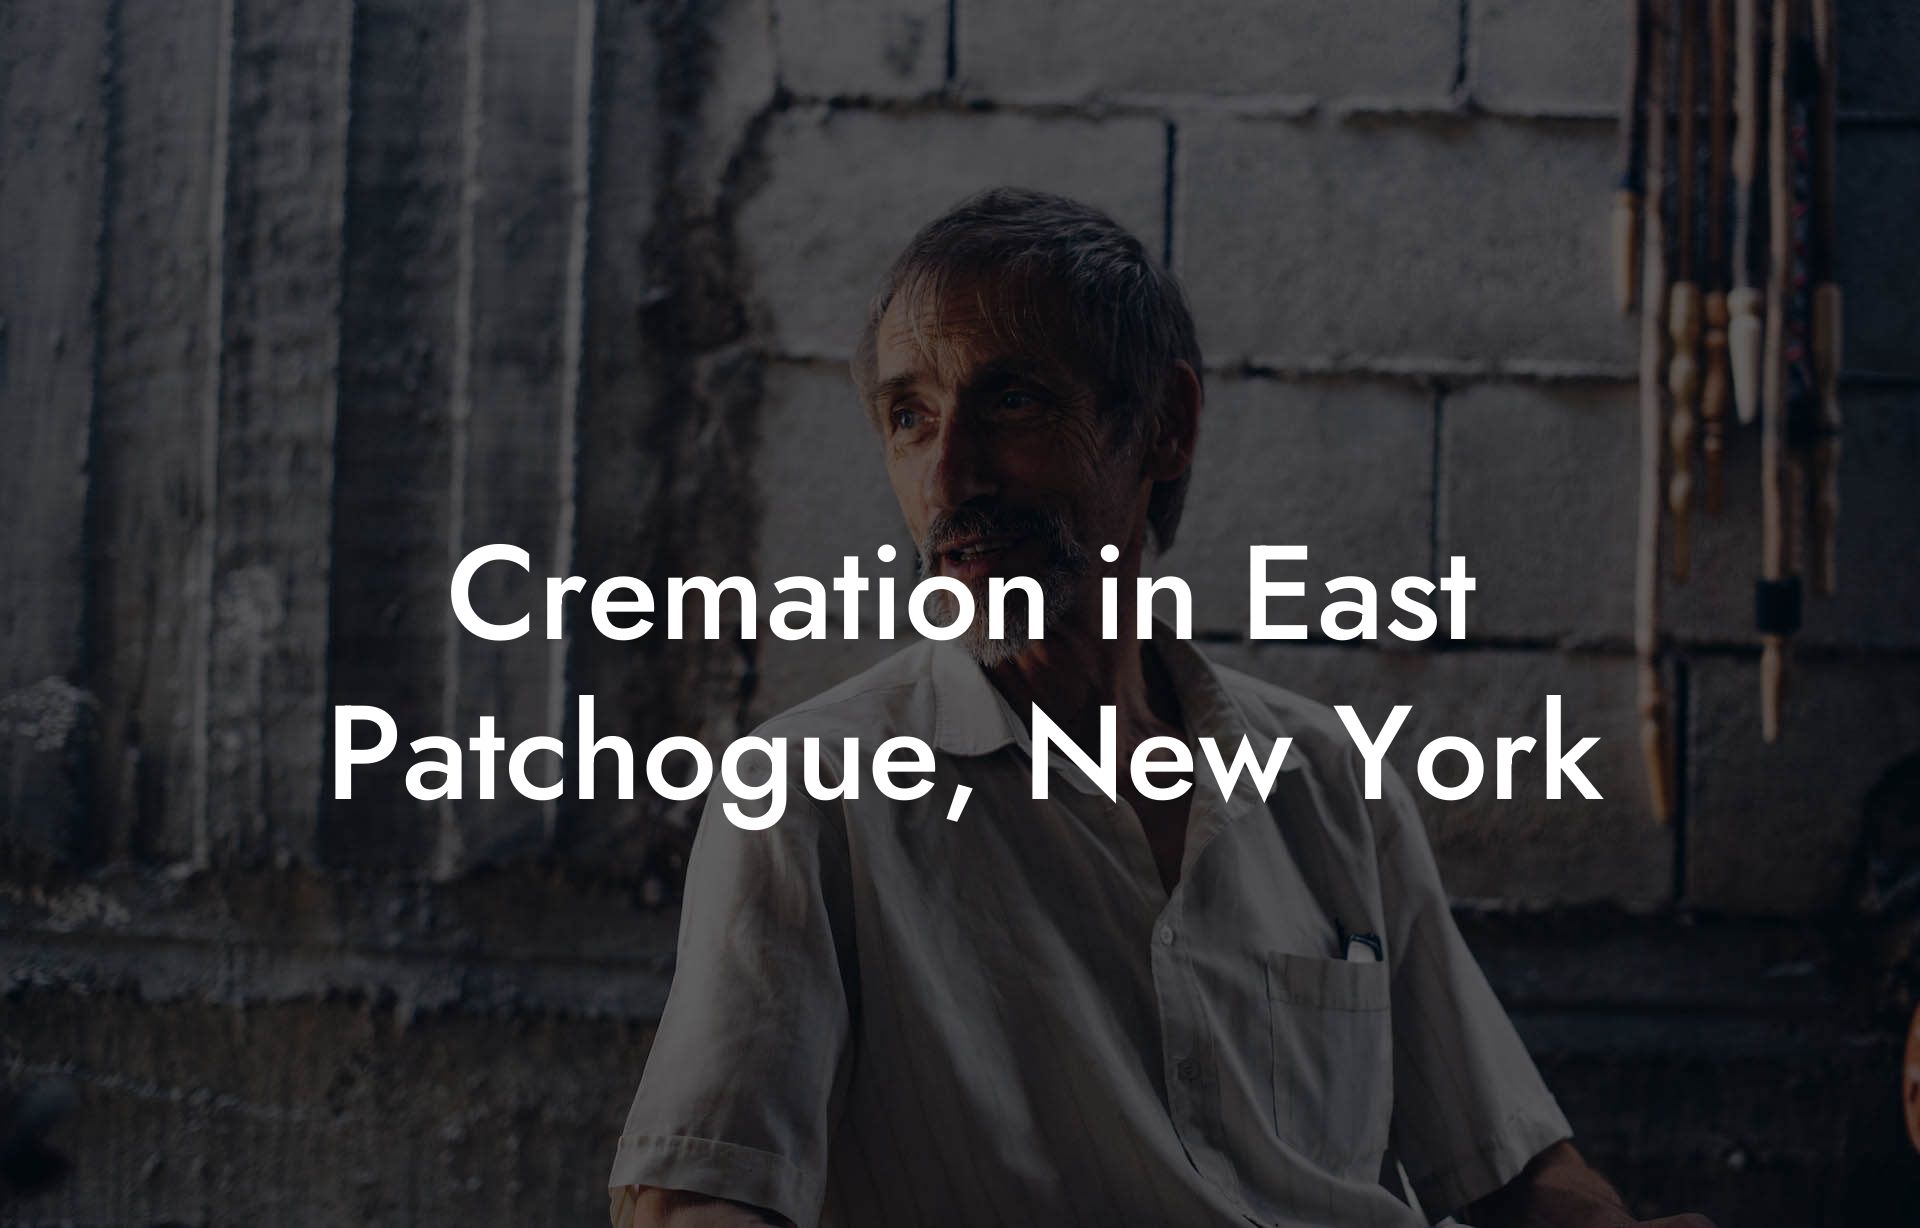 Cremation in East Patchogue, New York